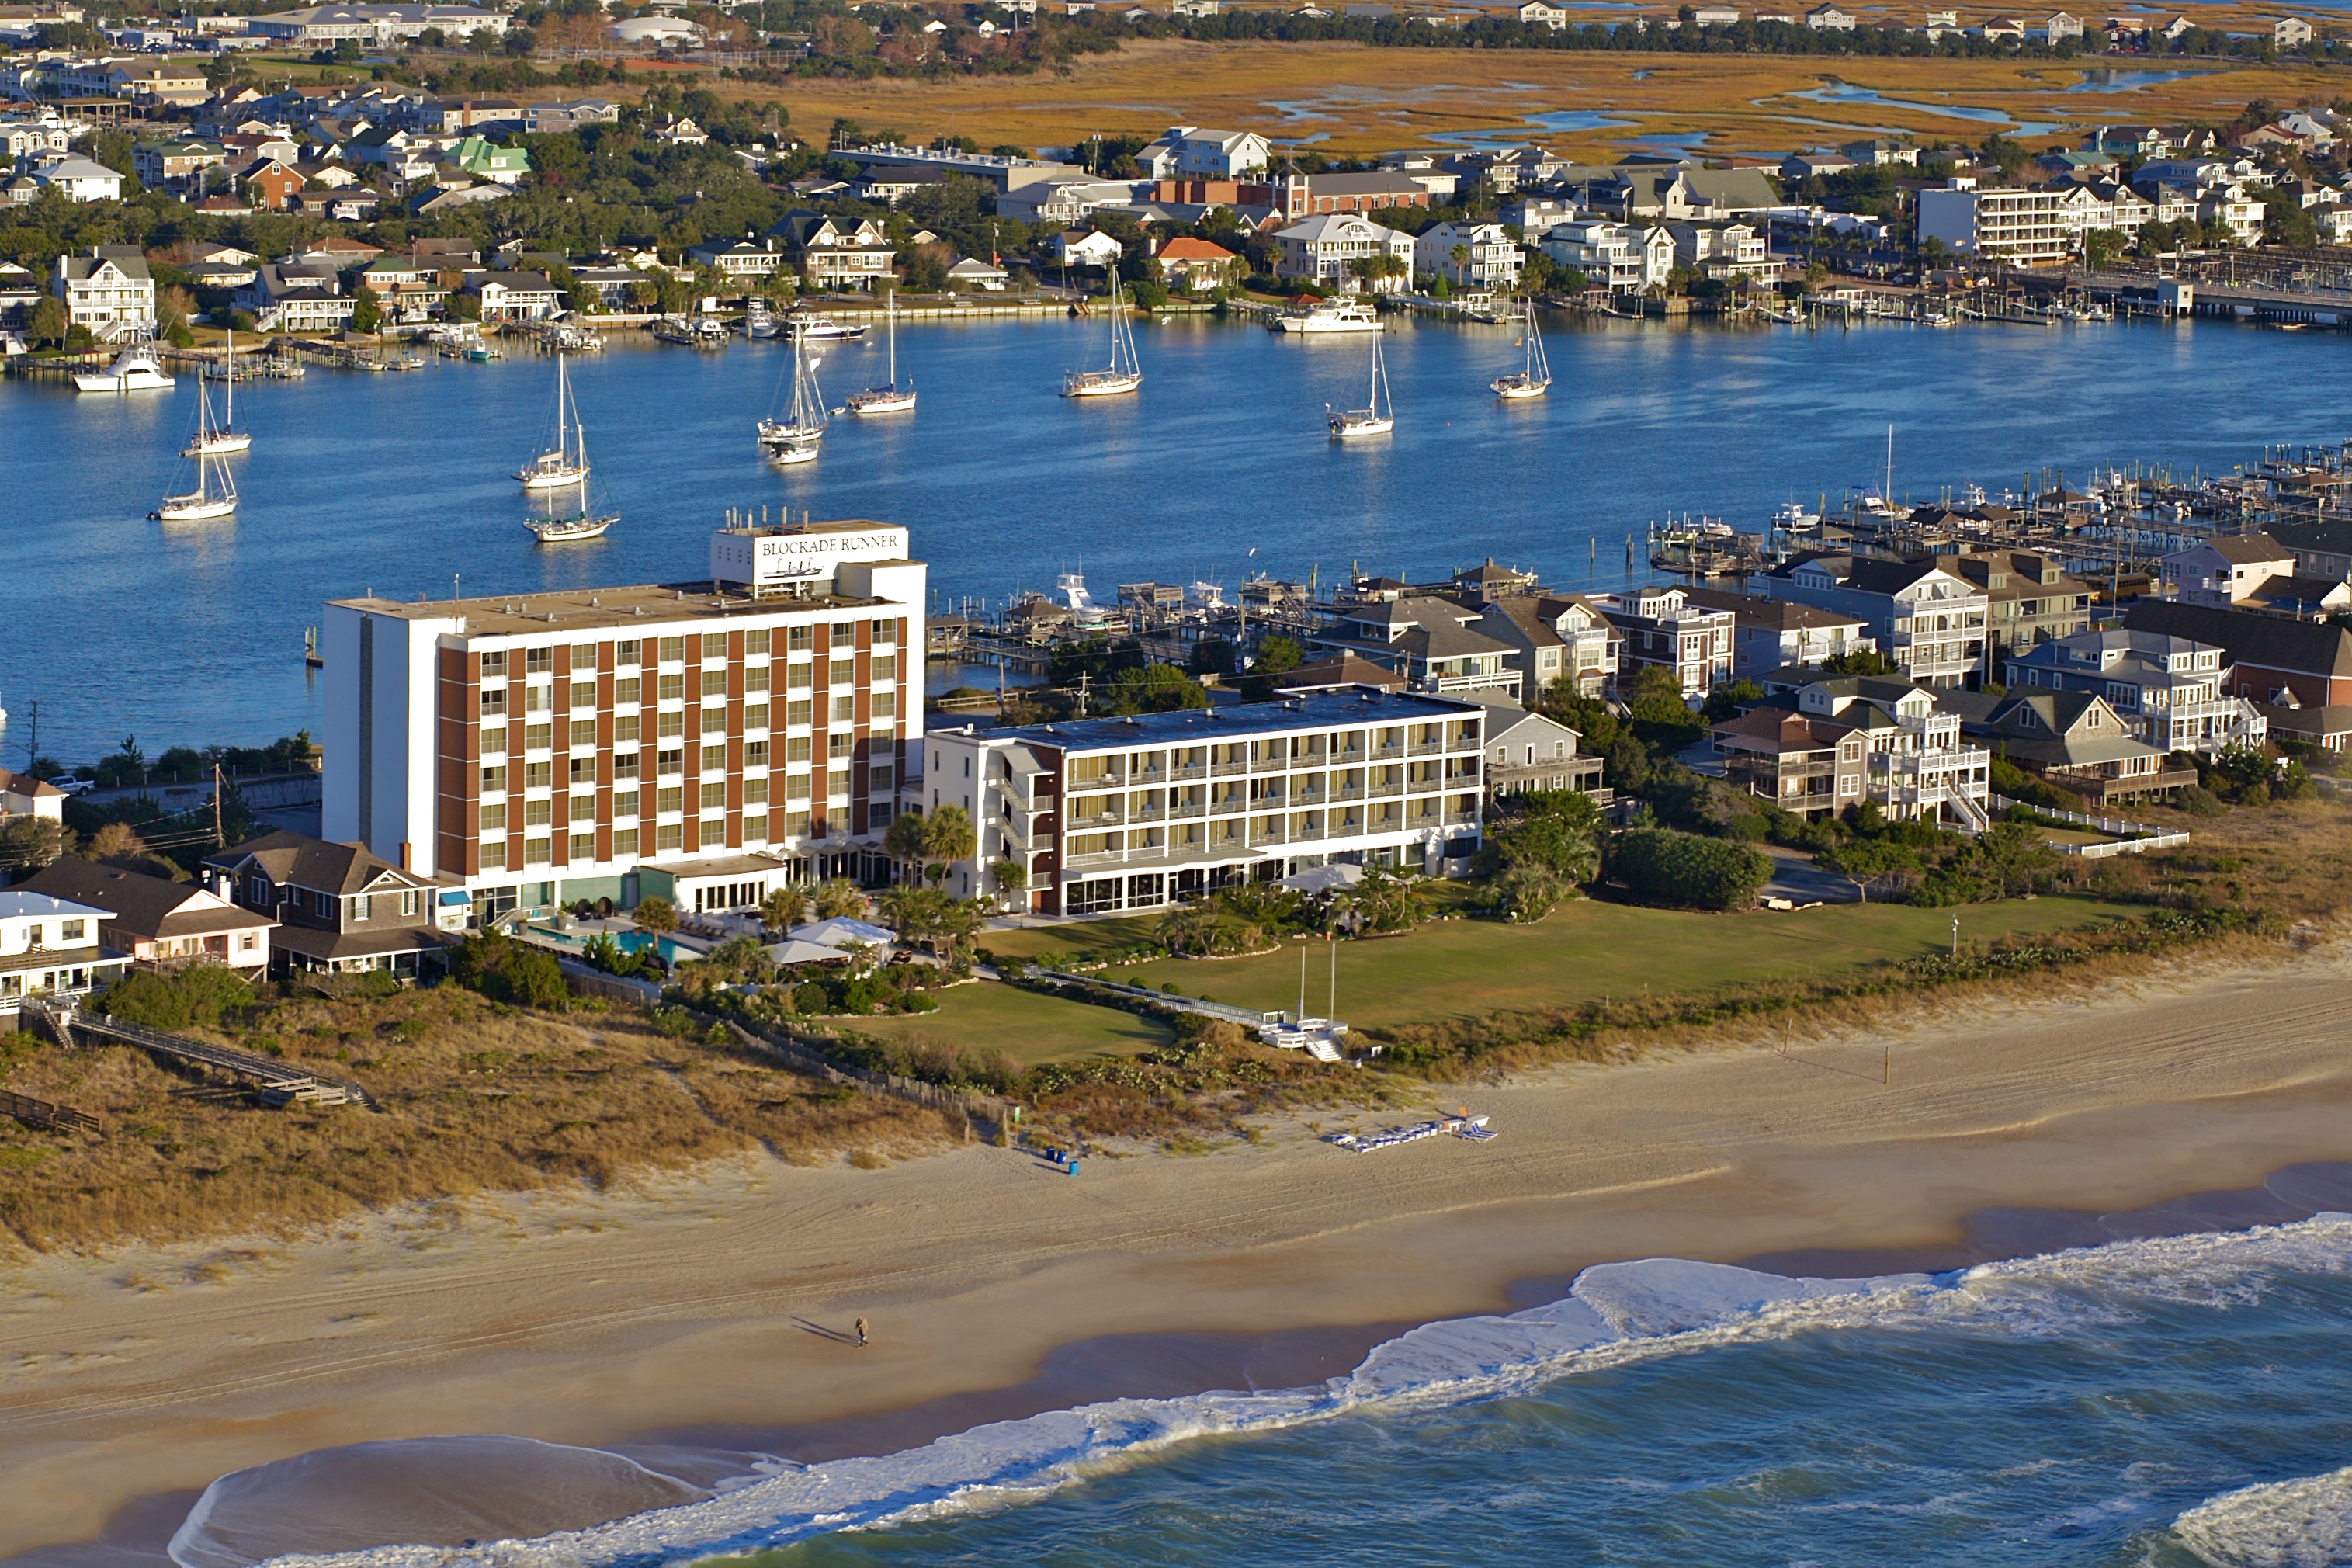 Races begin and end at Blockade Runner Beach Resort, home of the North Carolina Surf to Sound Challenge